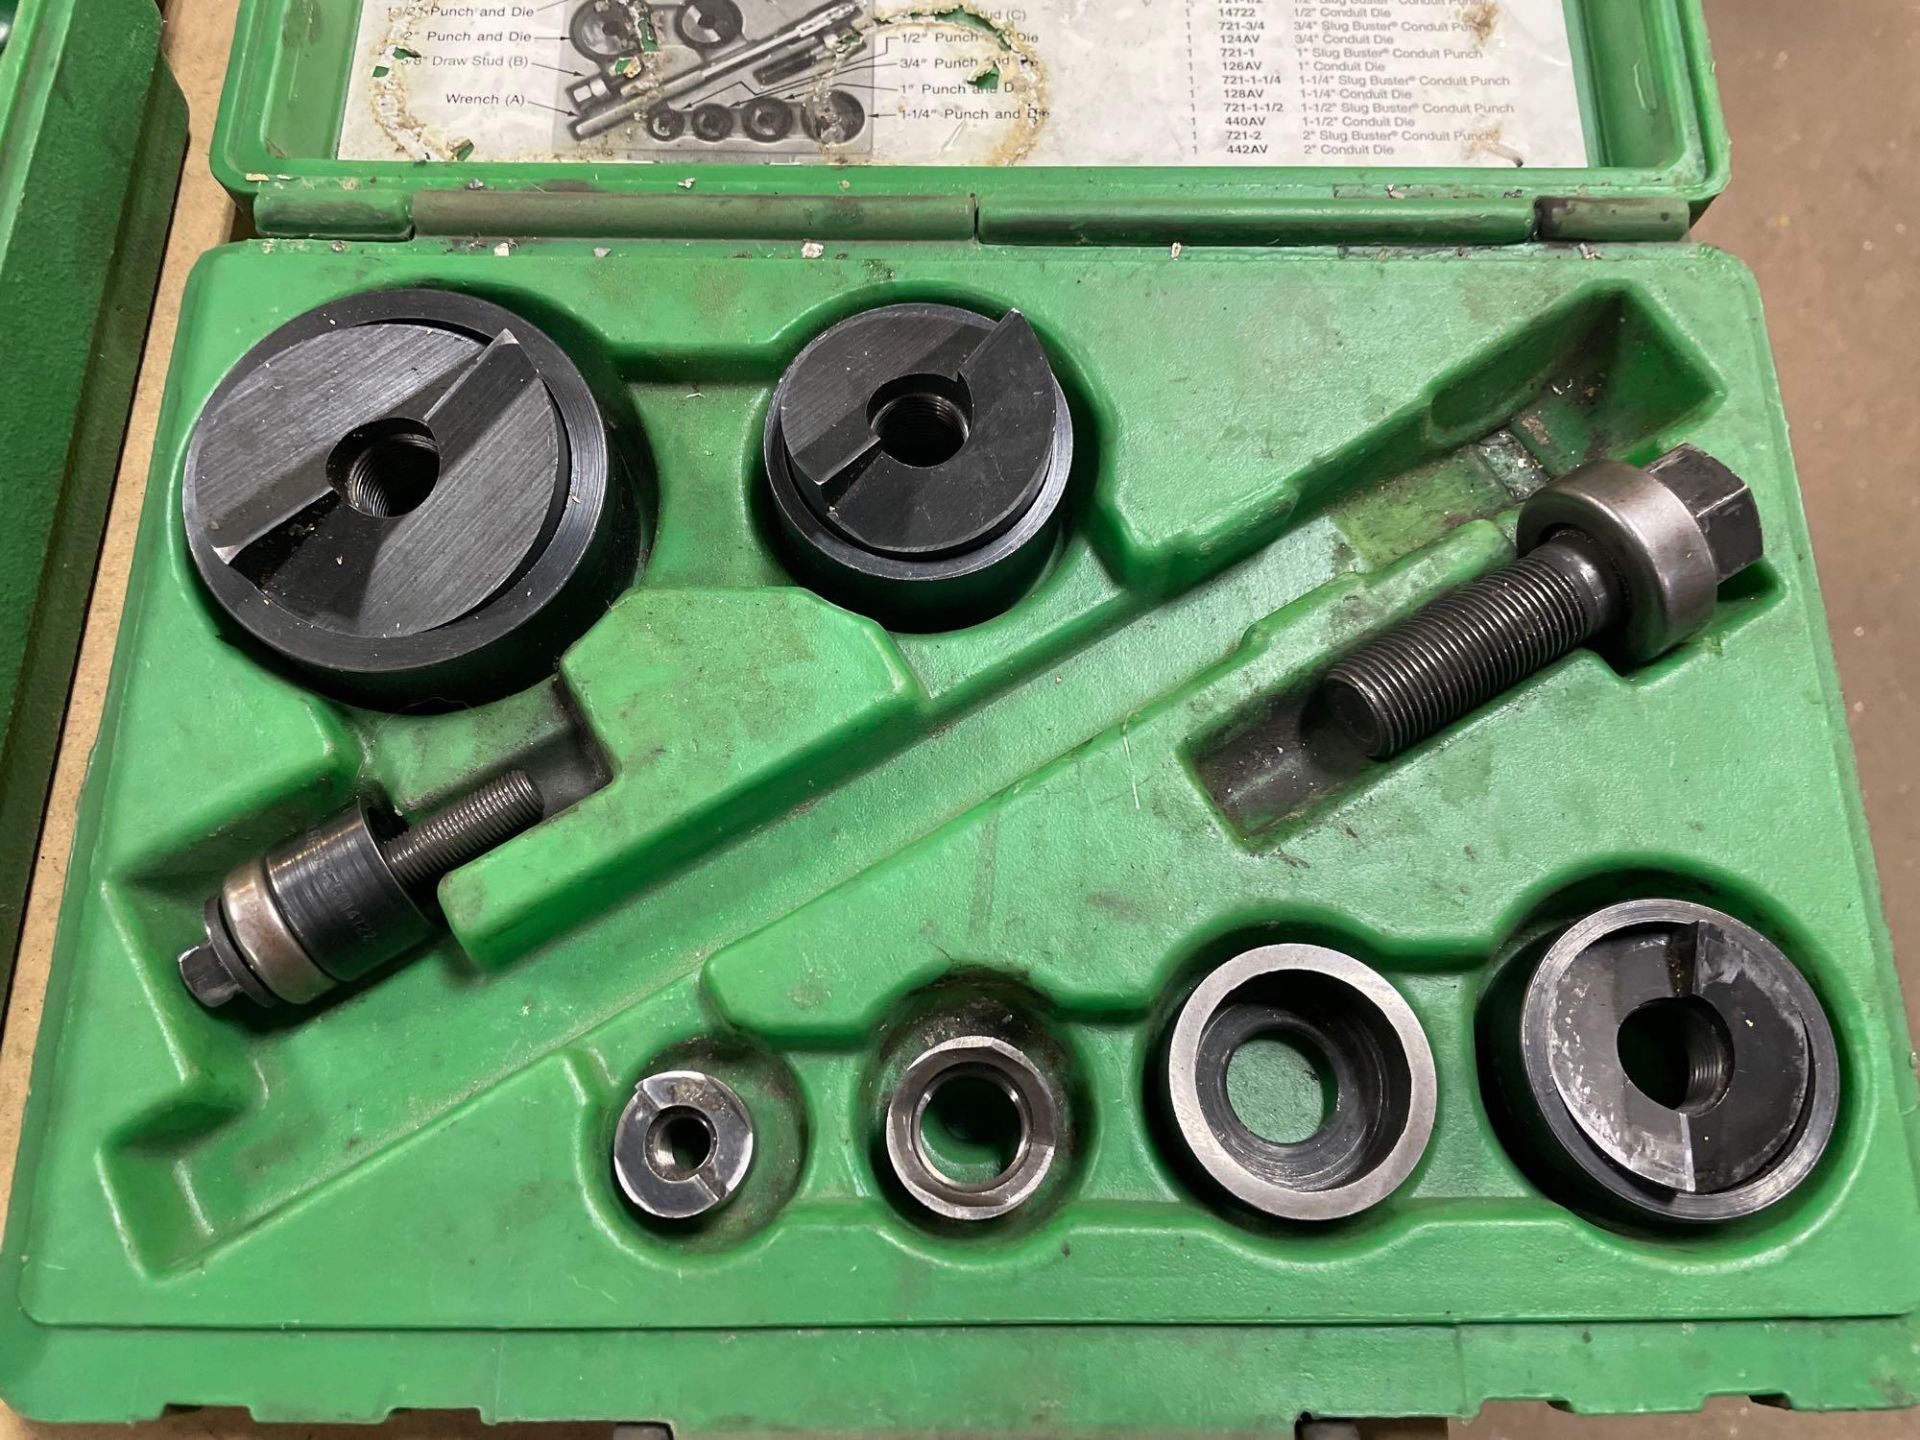 Greenlee Hydraulic Punch Driver/Knockout Punch Kits - Image 4 of 5